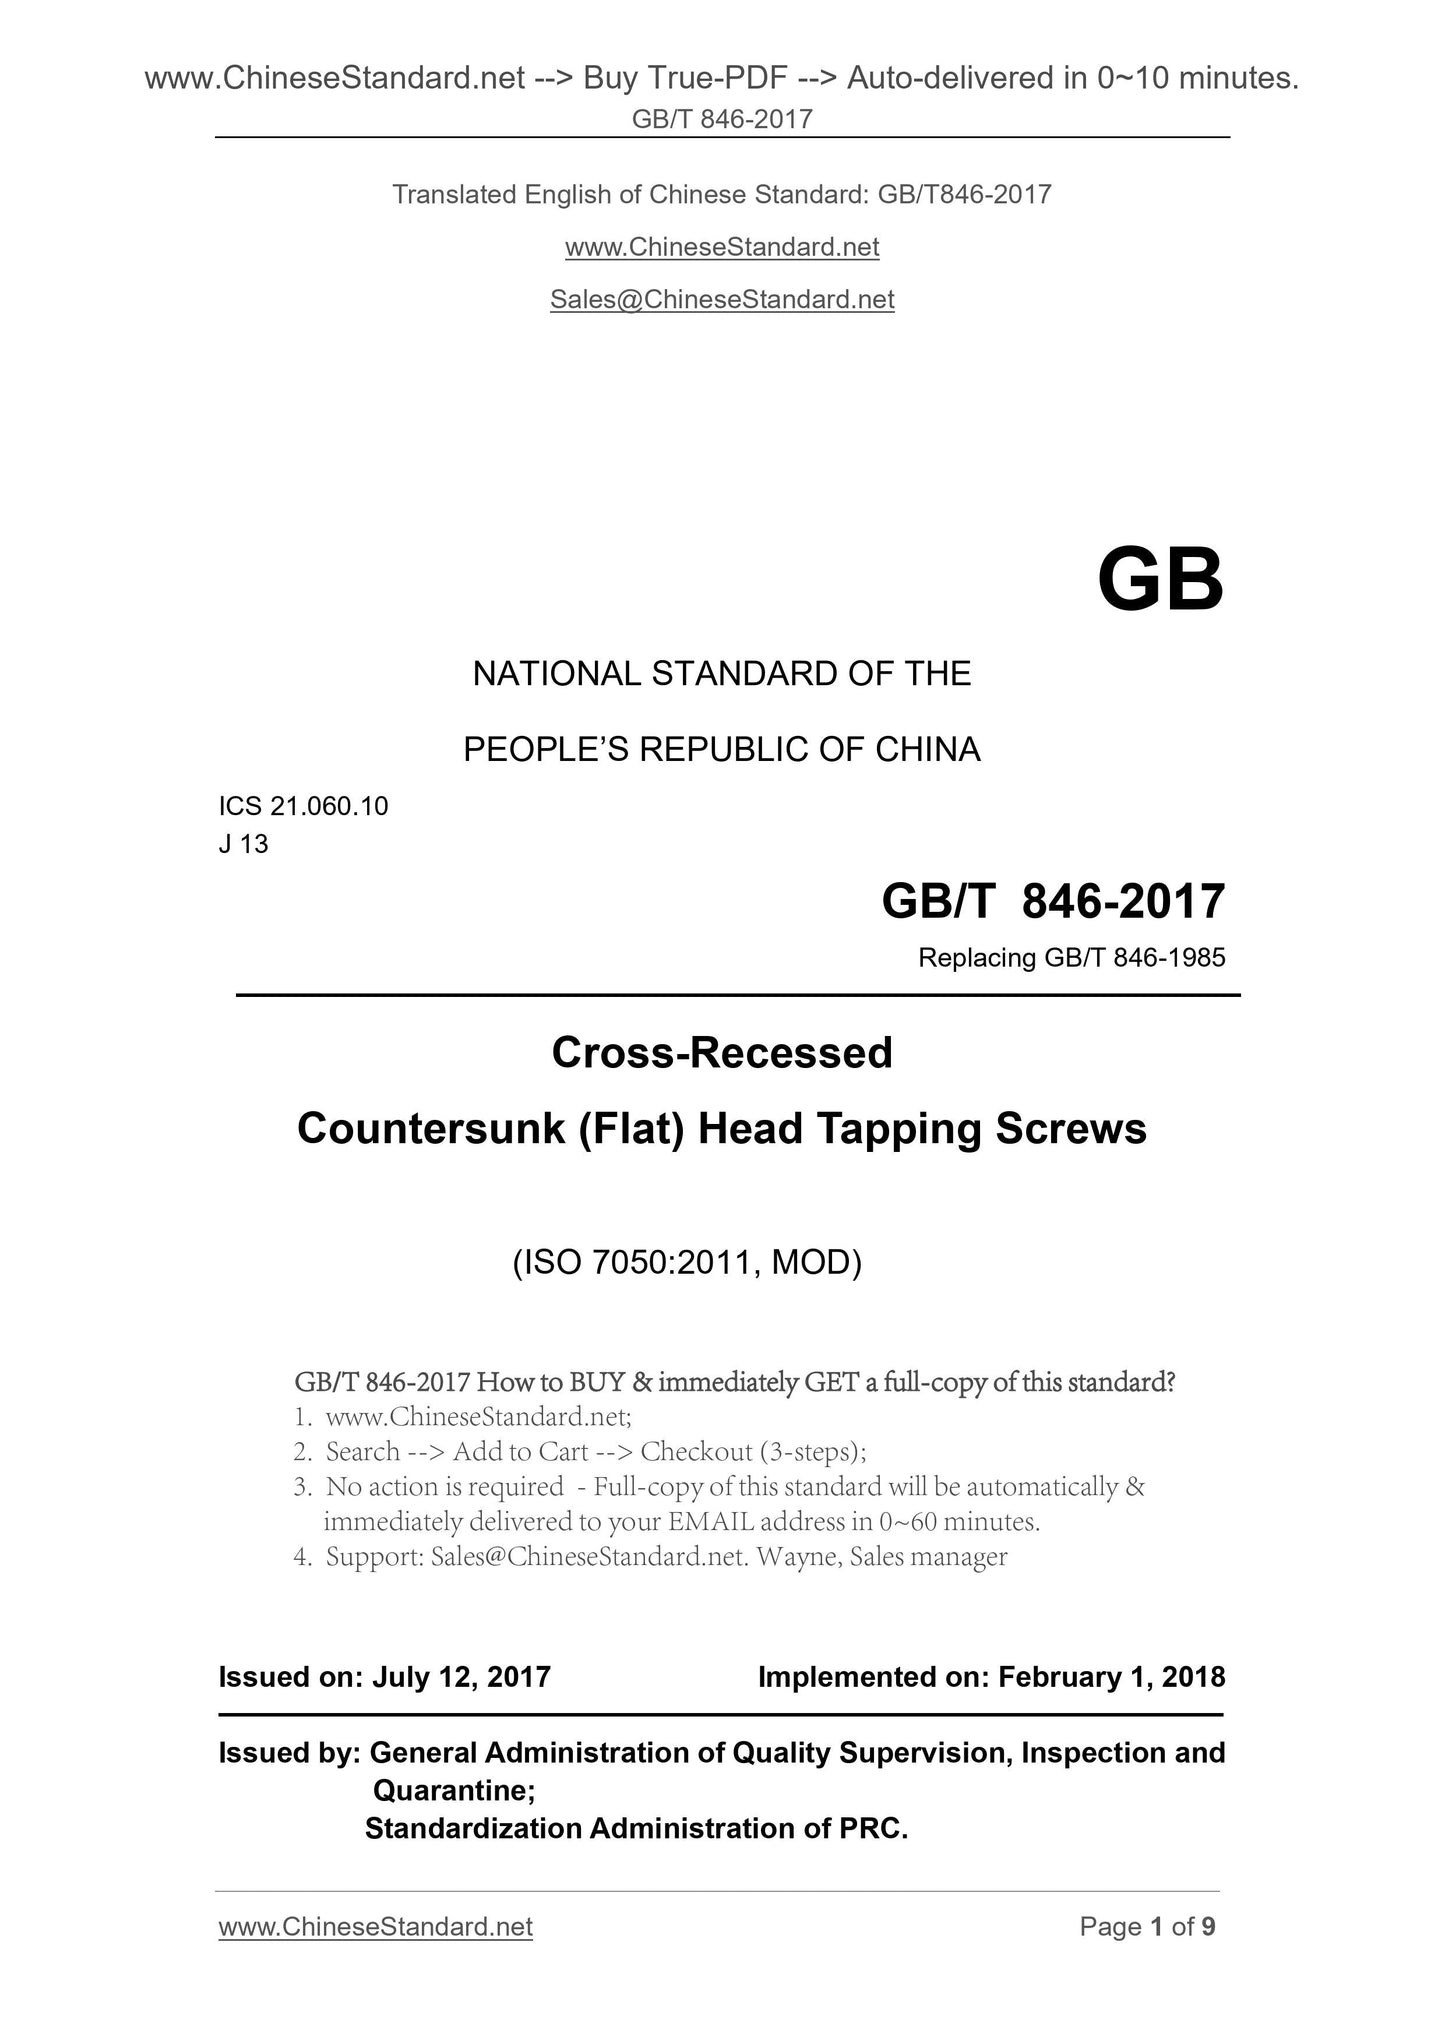 GB/T 846-2017 Page 1